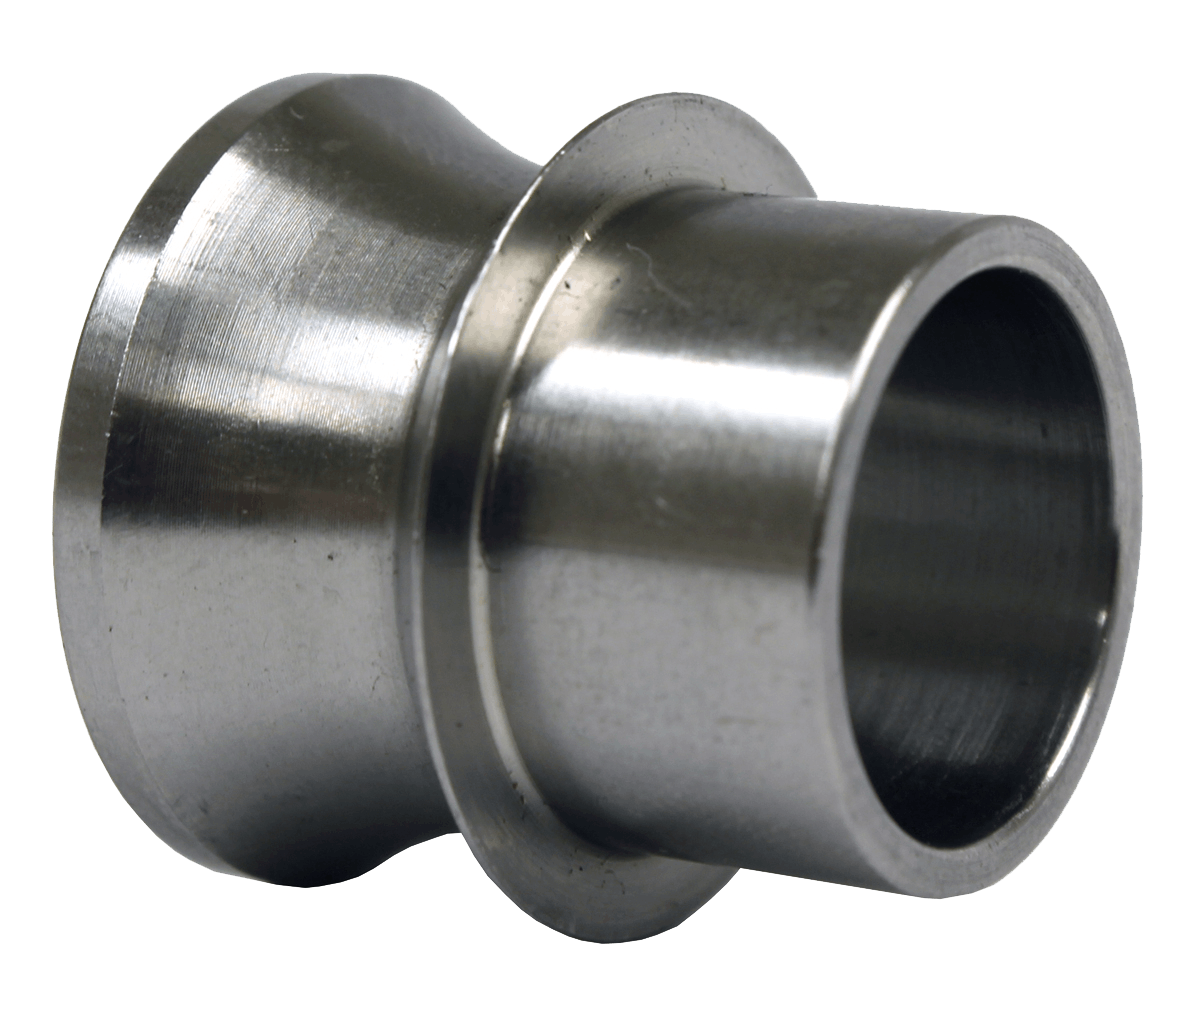 QA1 SN14-129 High Misalignment Spacer, .875 inch Od Ss, .75 inch X 2 inch Total Width